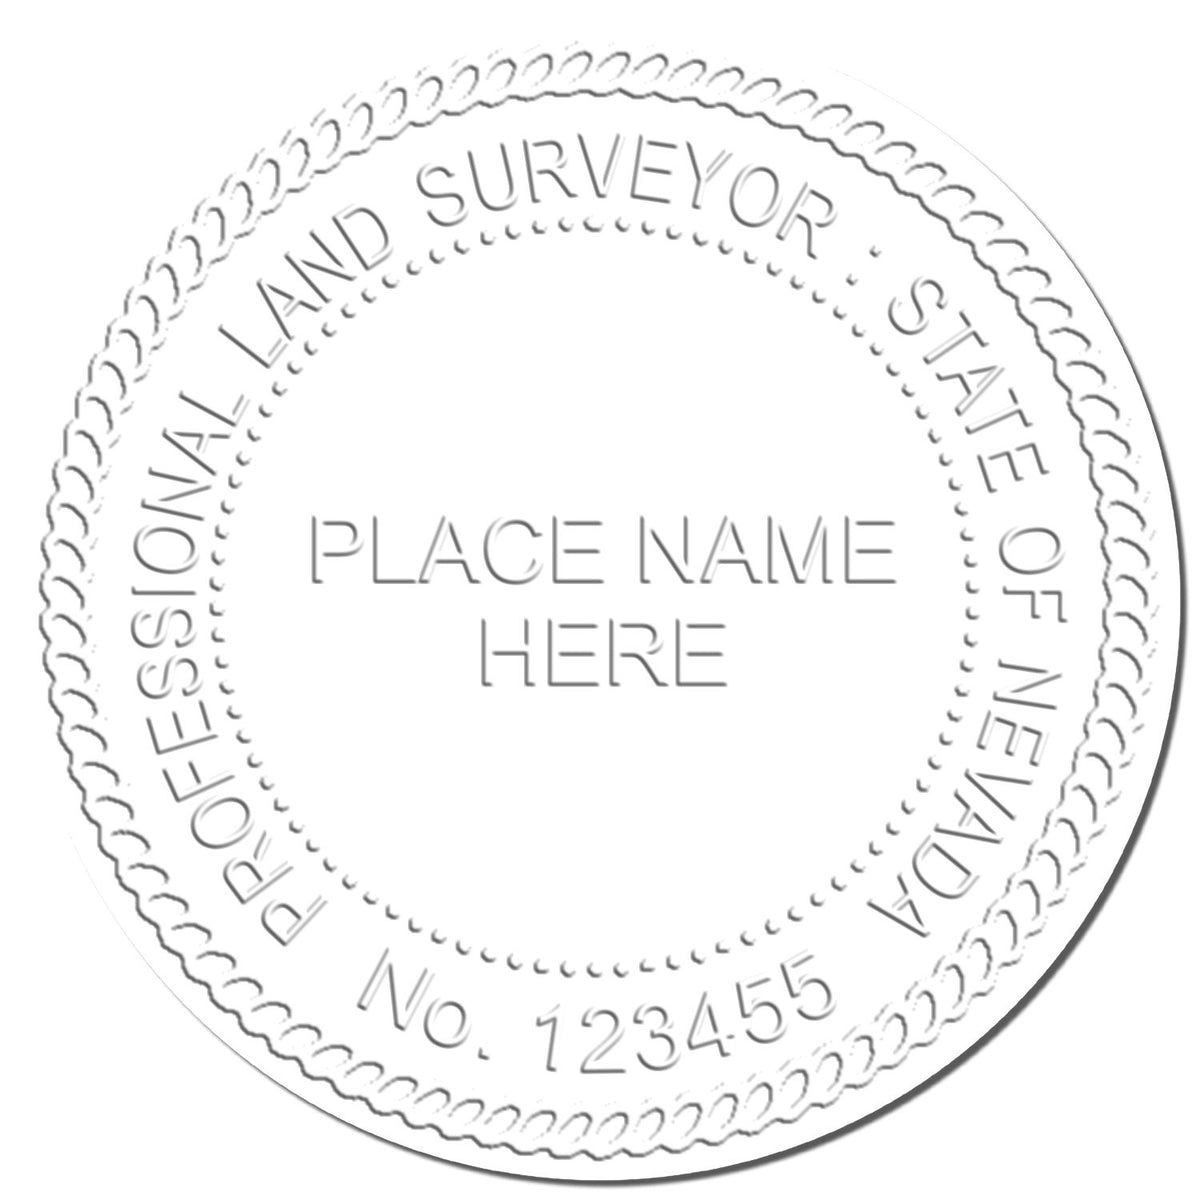 This paper is stamped with a sample imprint of the Gift Nevada Land Surveyor Seal, signifying its quality and reliability.